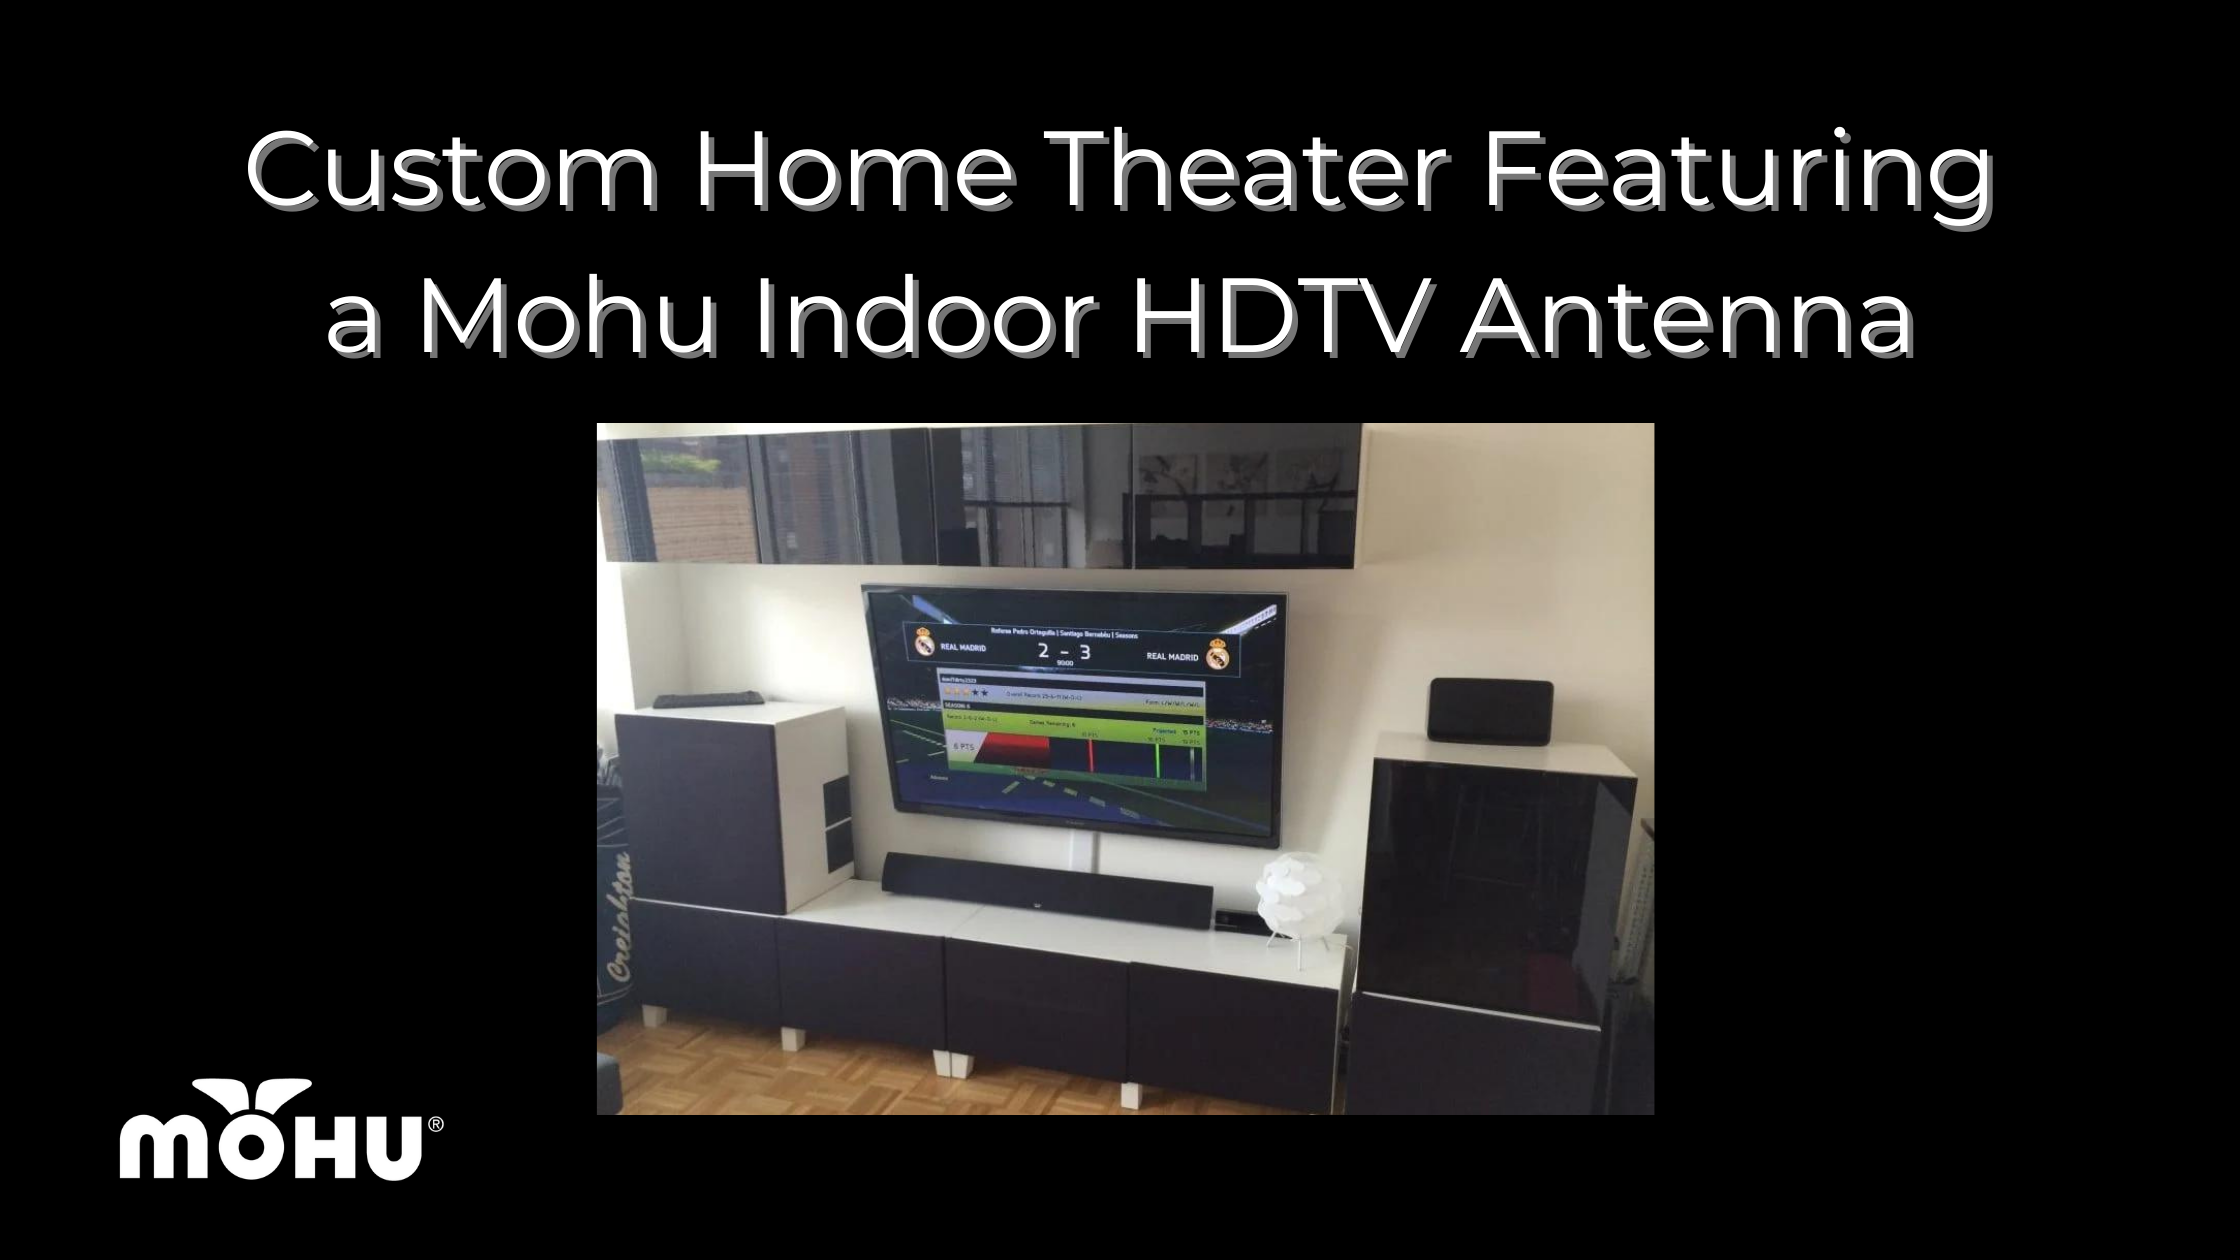 Custom Home Theater Featuring a Mohu Indoor HDTV Antenna